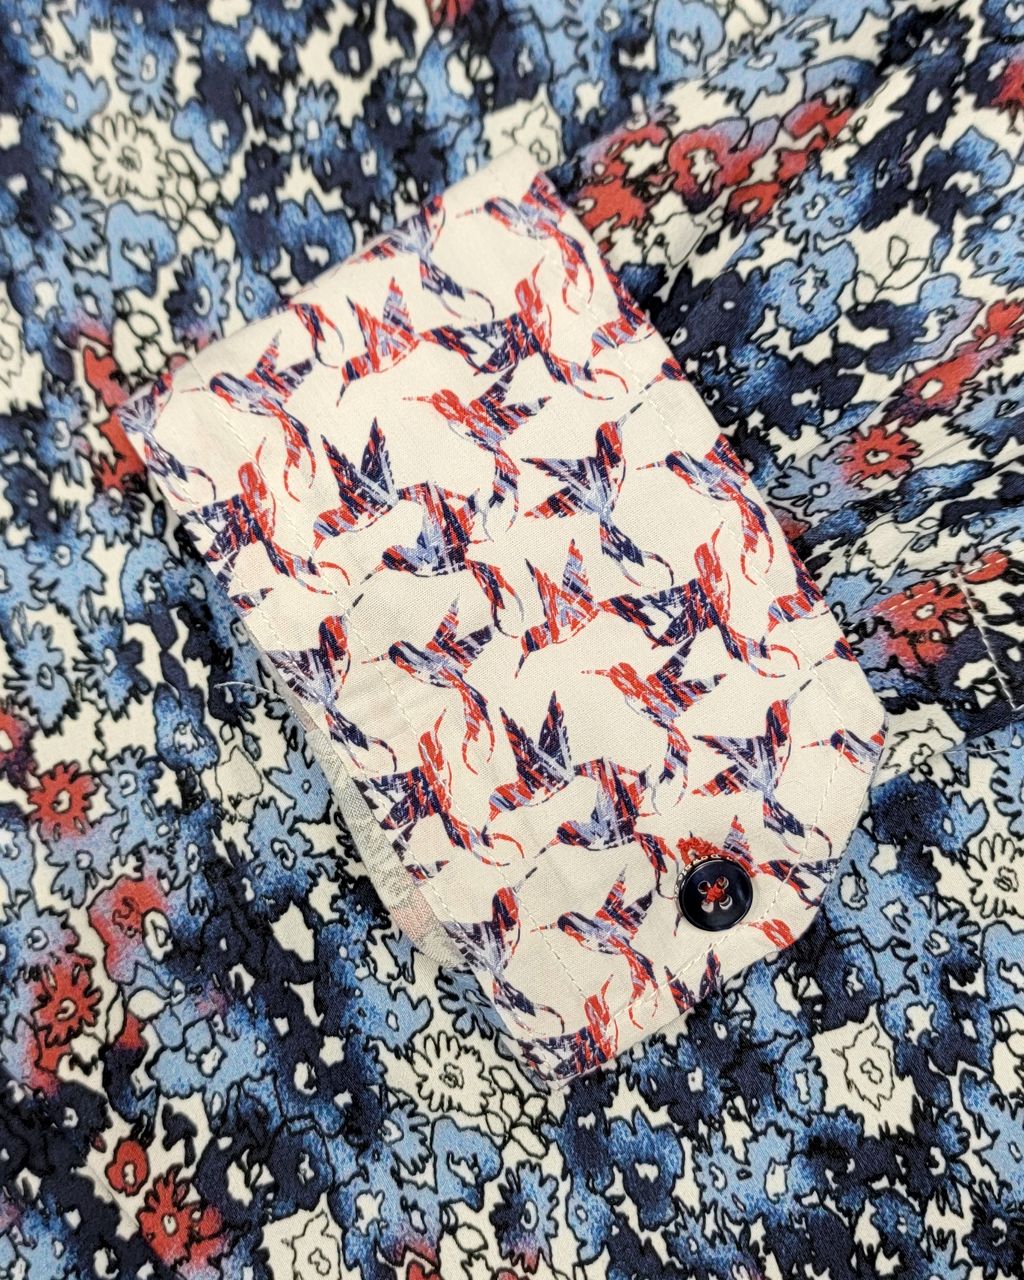 7 Downie St. Long Sleeve Sport Shirt in Red/White/Blue Abstract Floral Pattern